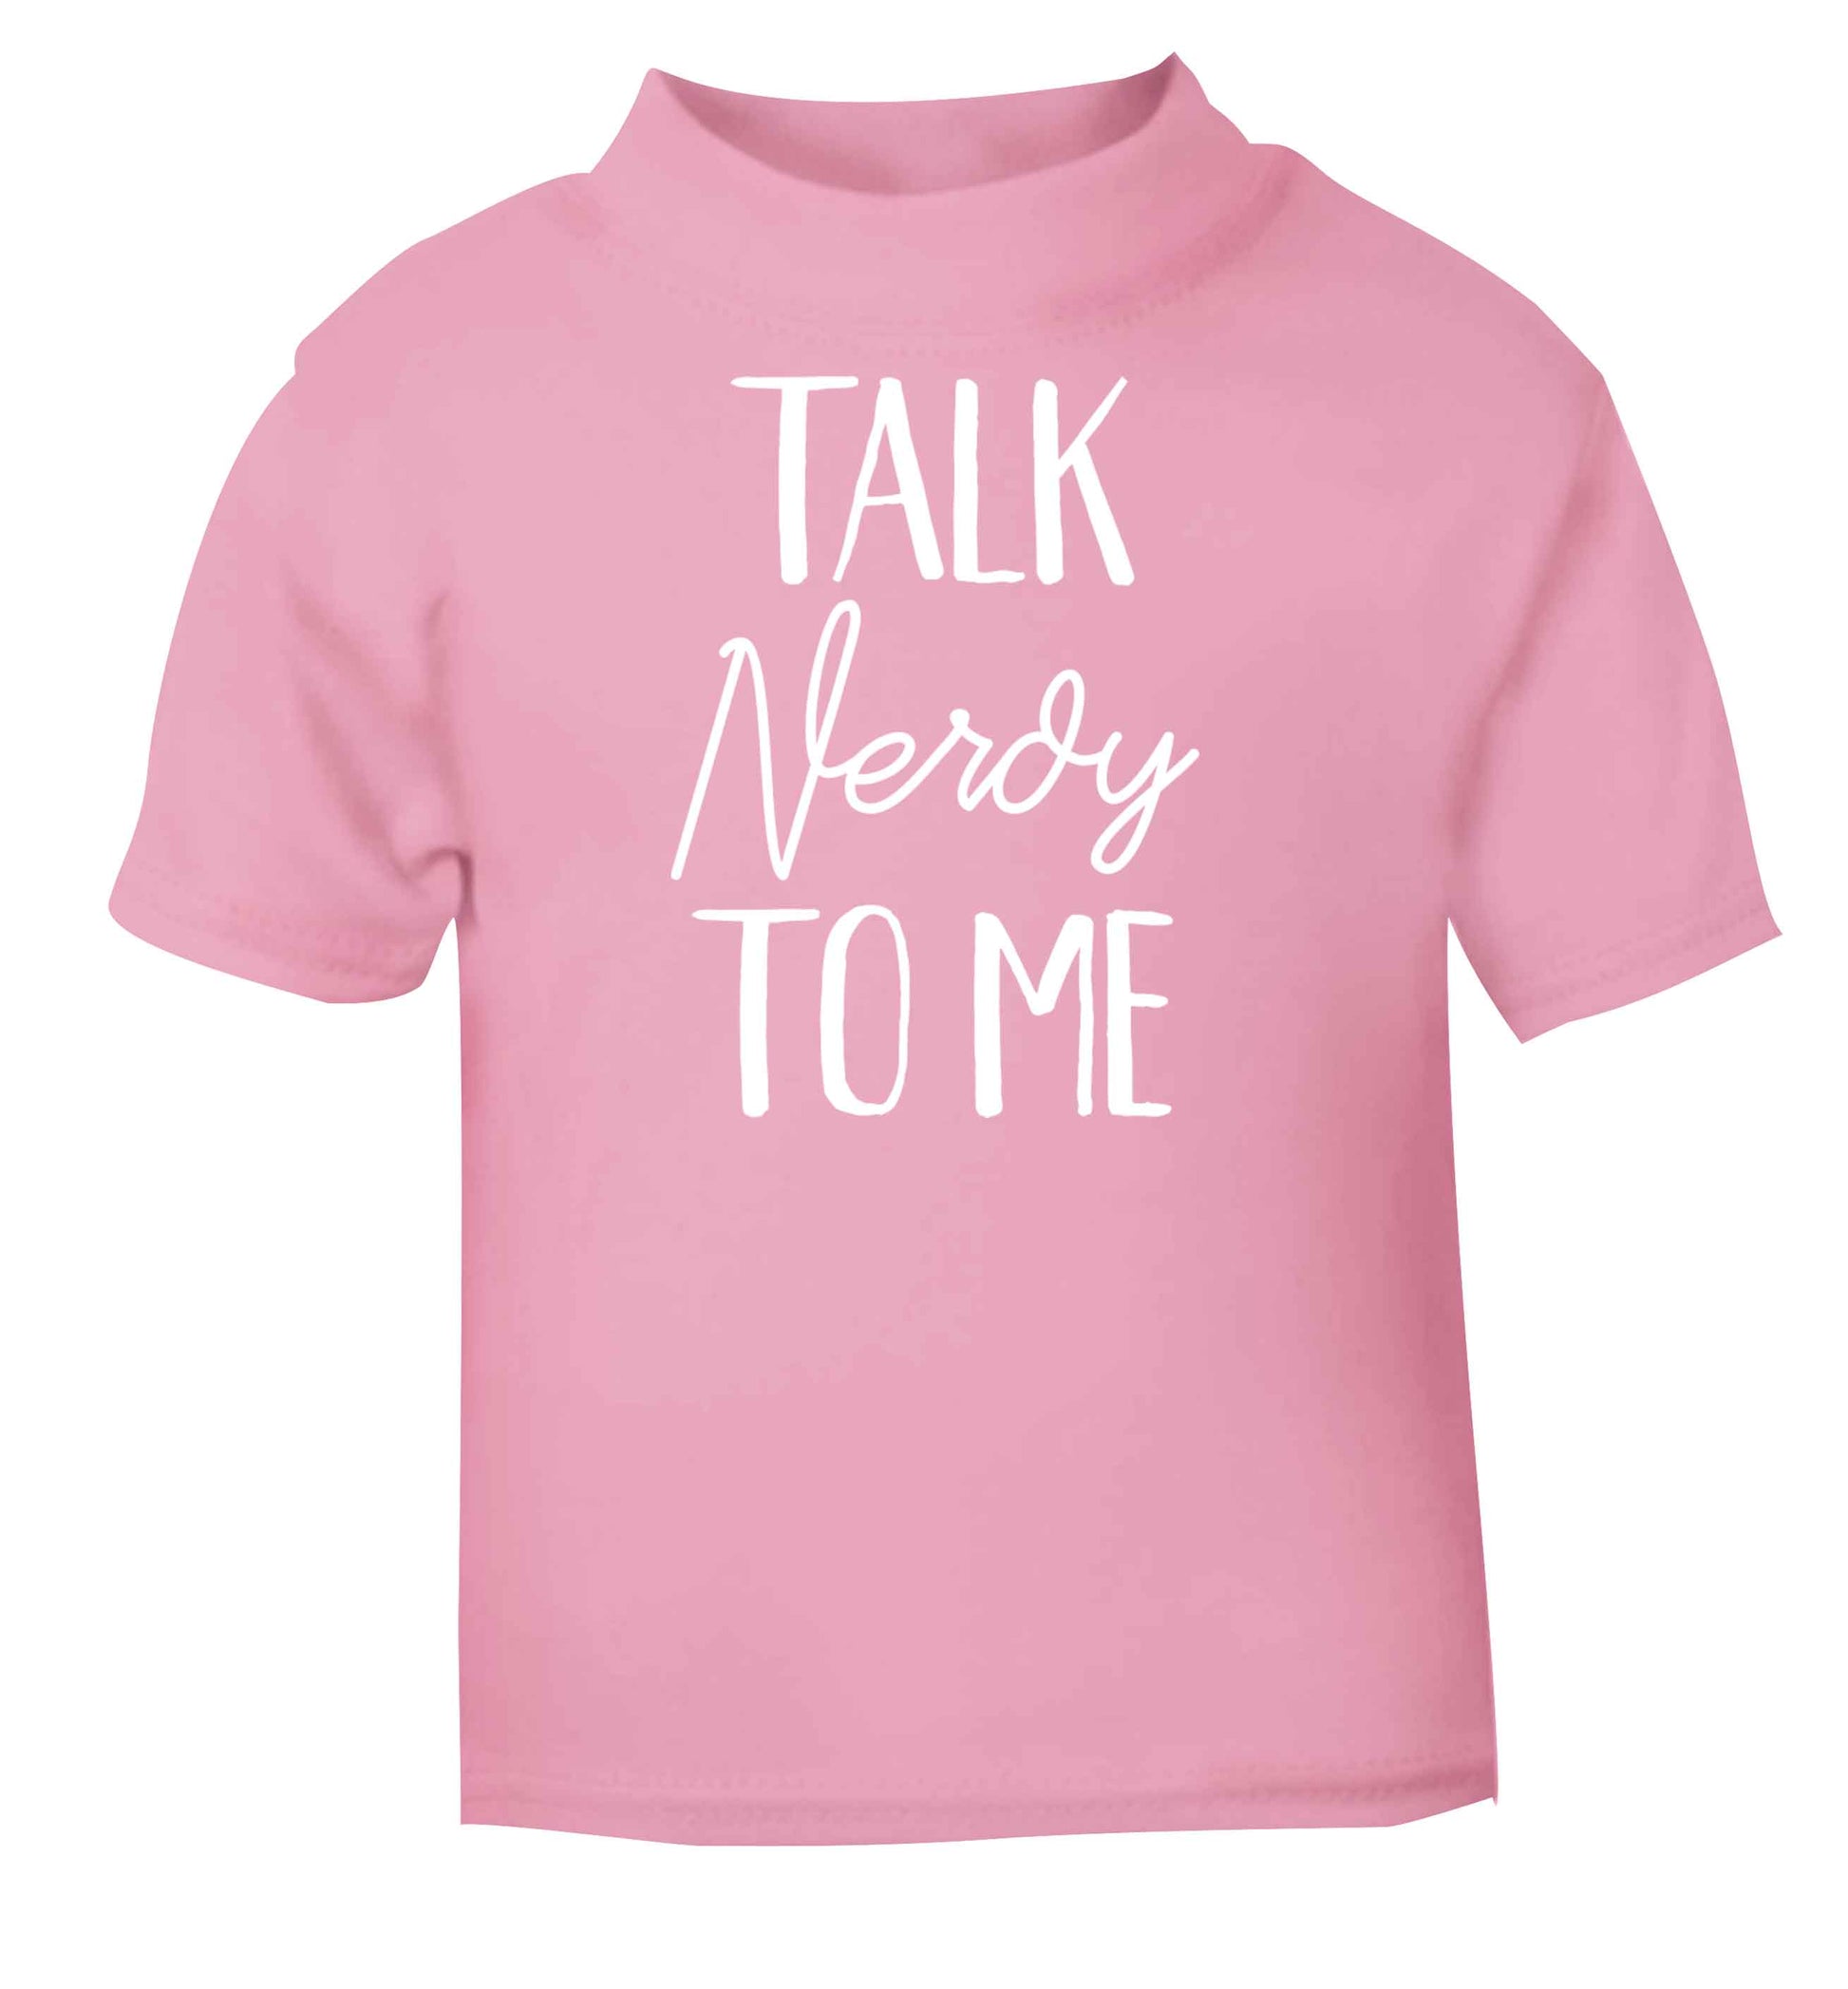 Talk nerdy to me light pink baby toddler Tshirt 2 Years